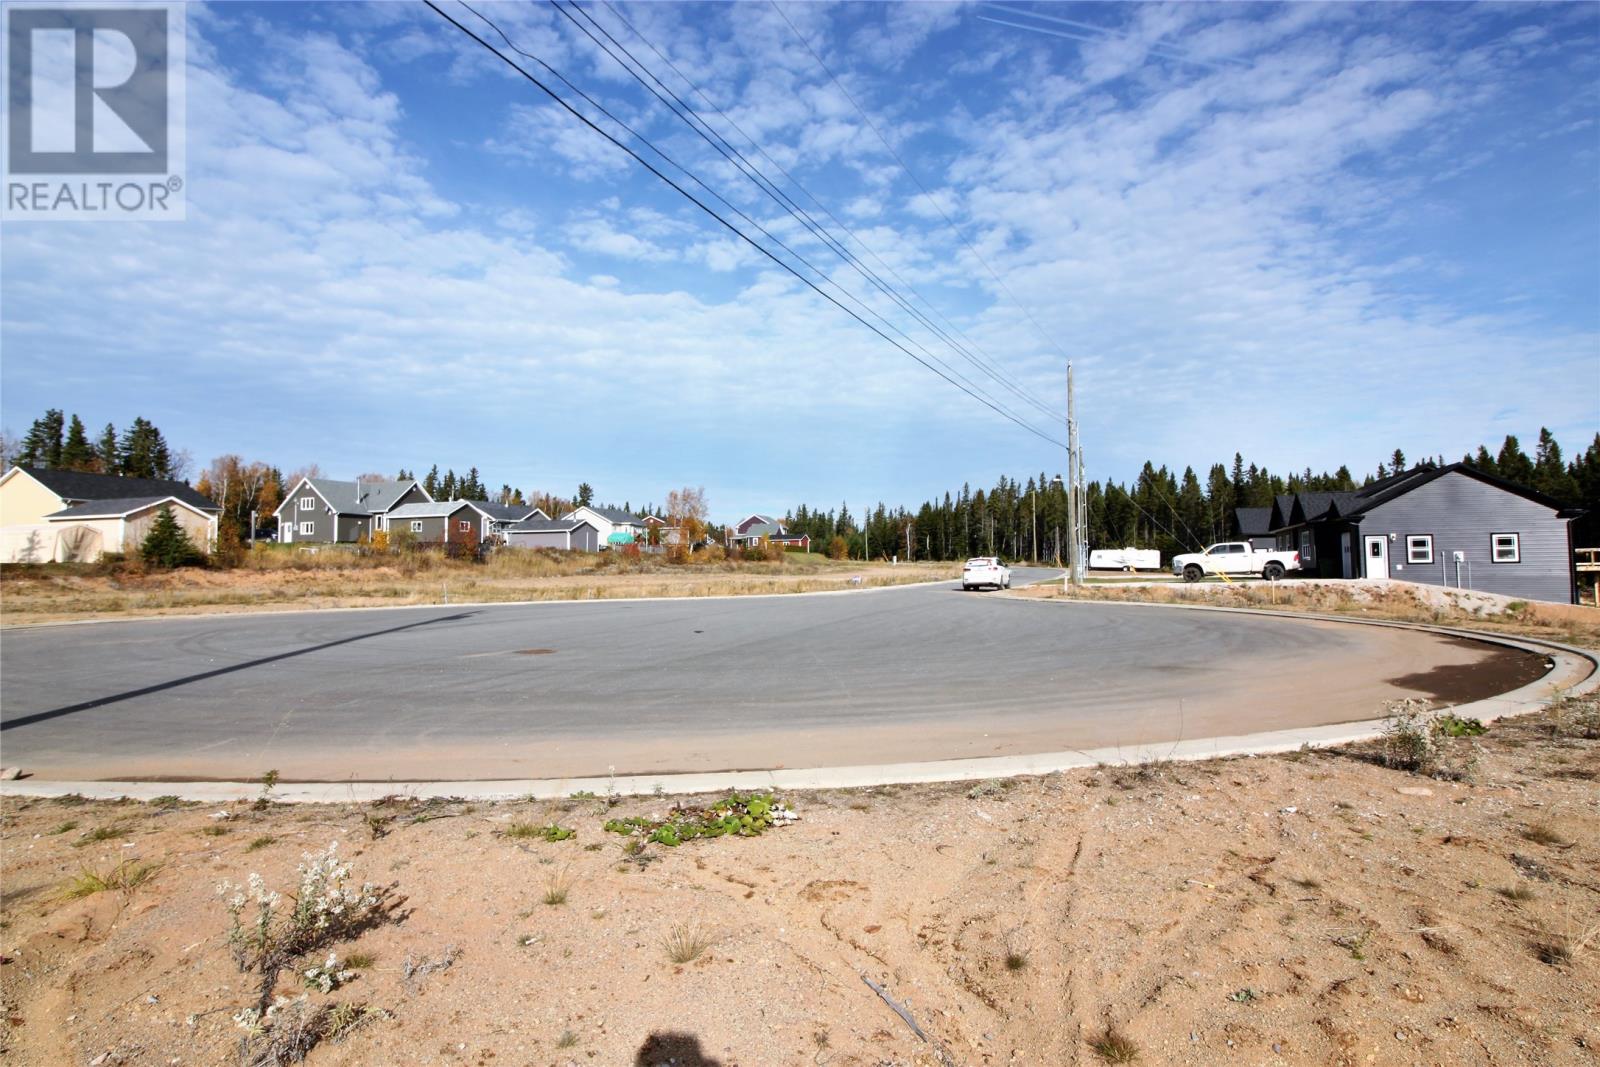 LOT 1 Stella's Place located in Deer Lake, Newfoundland and Labrador